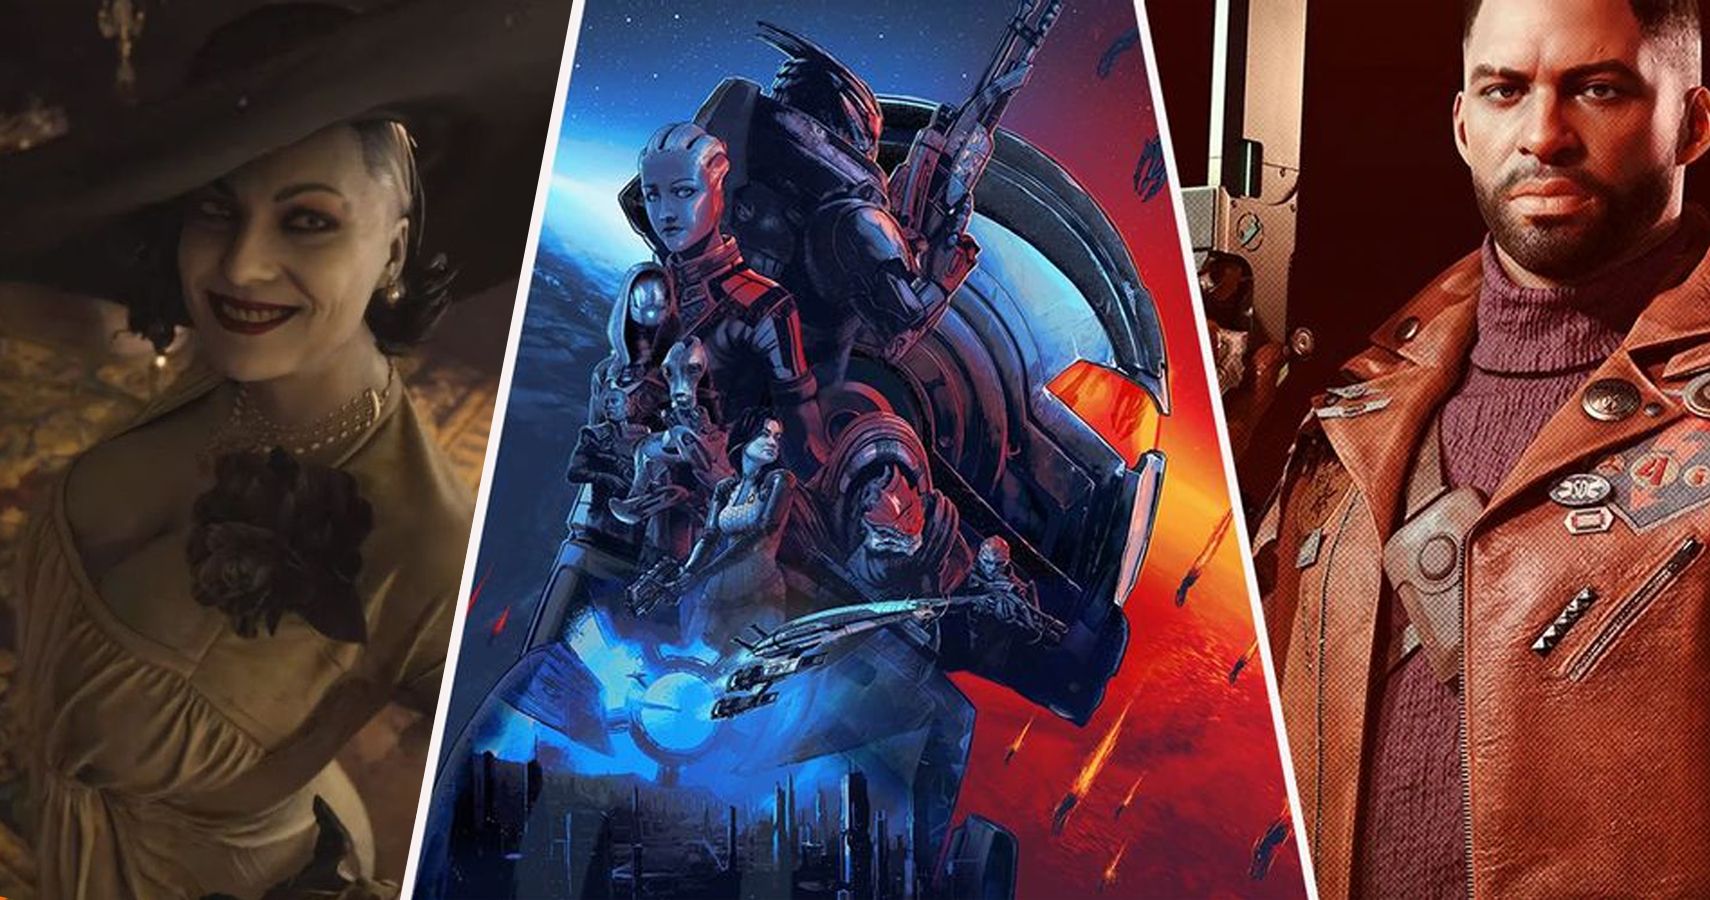 A Masterlist of 2021 Video Game Release Dates - Cinelinx